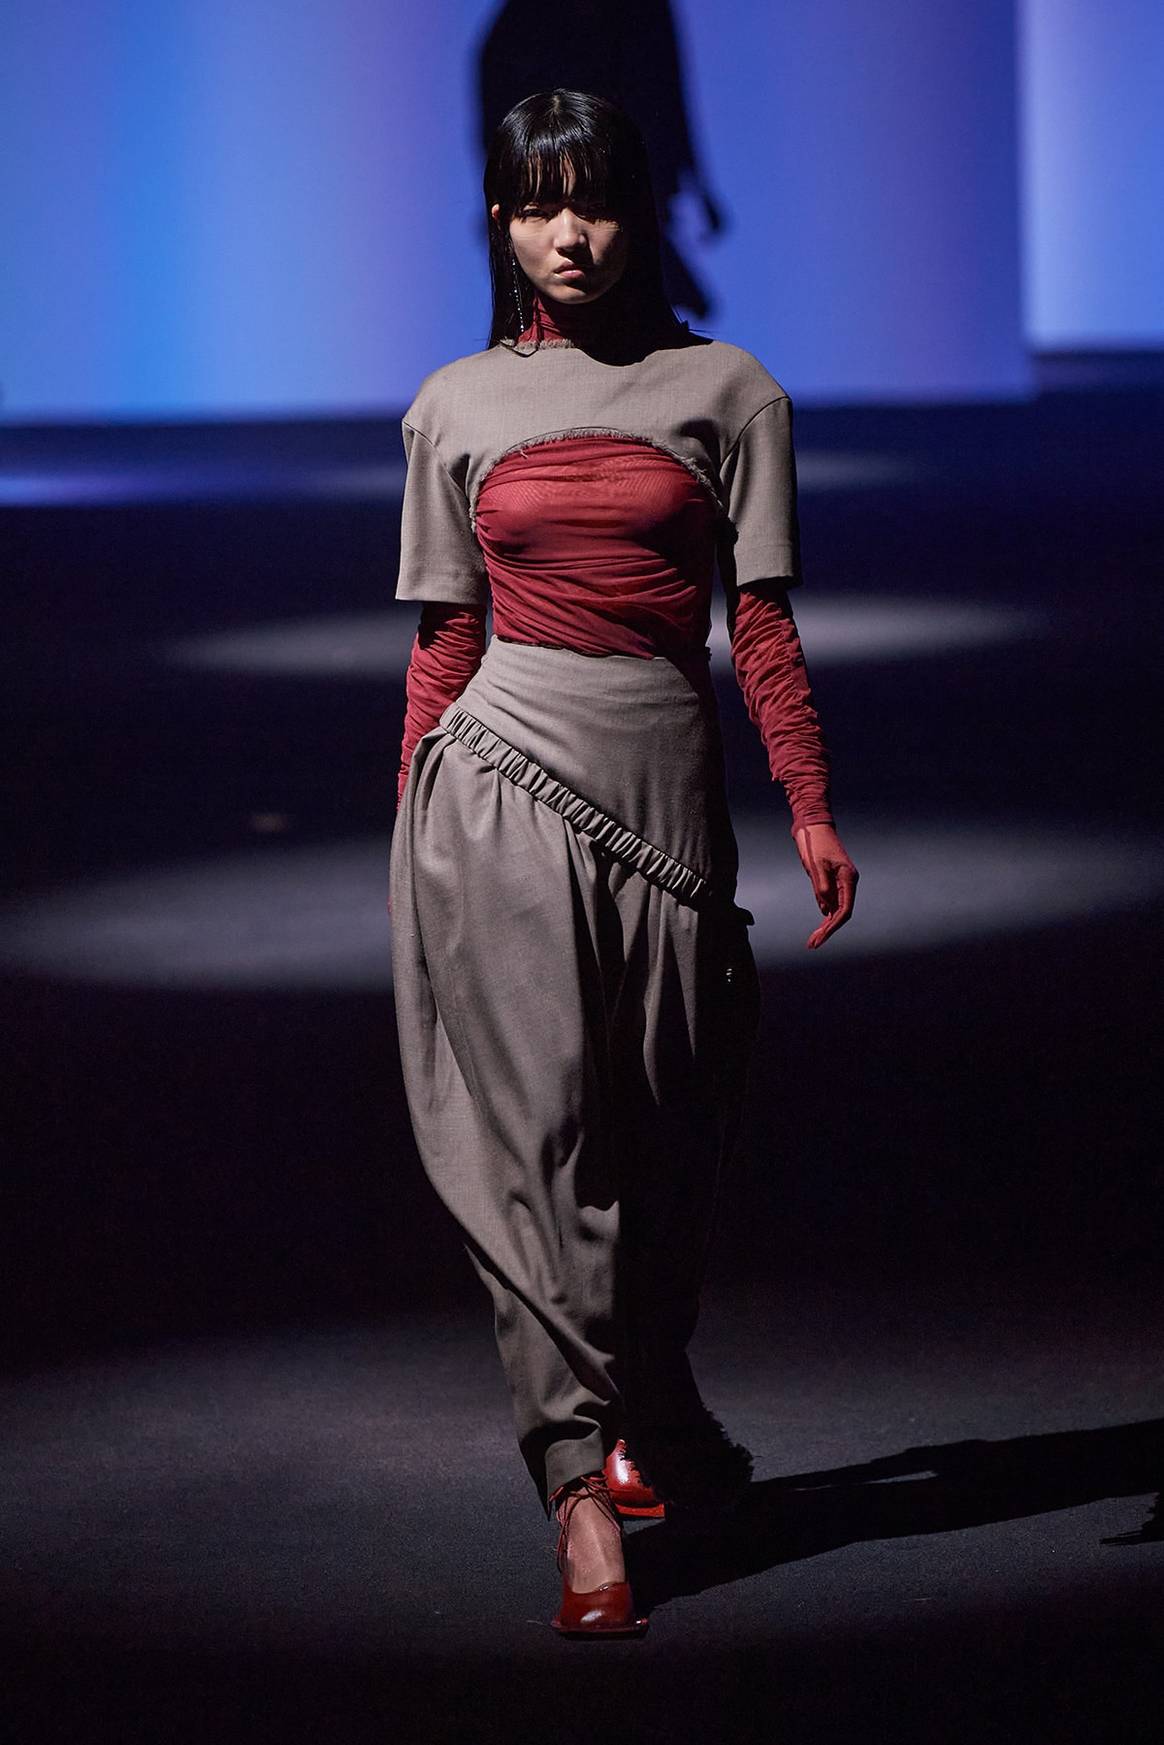 In Pictures: Istituto Marangoni Shanghai at SHFW